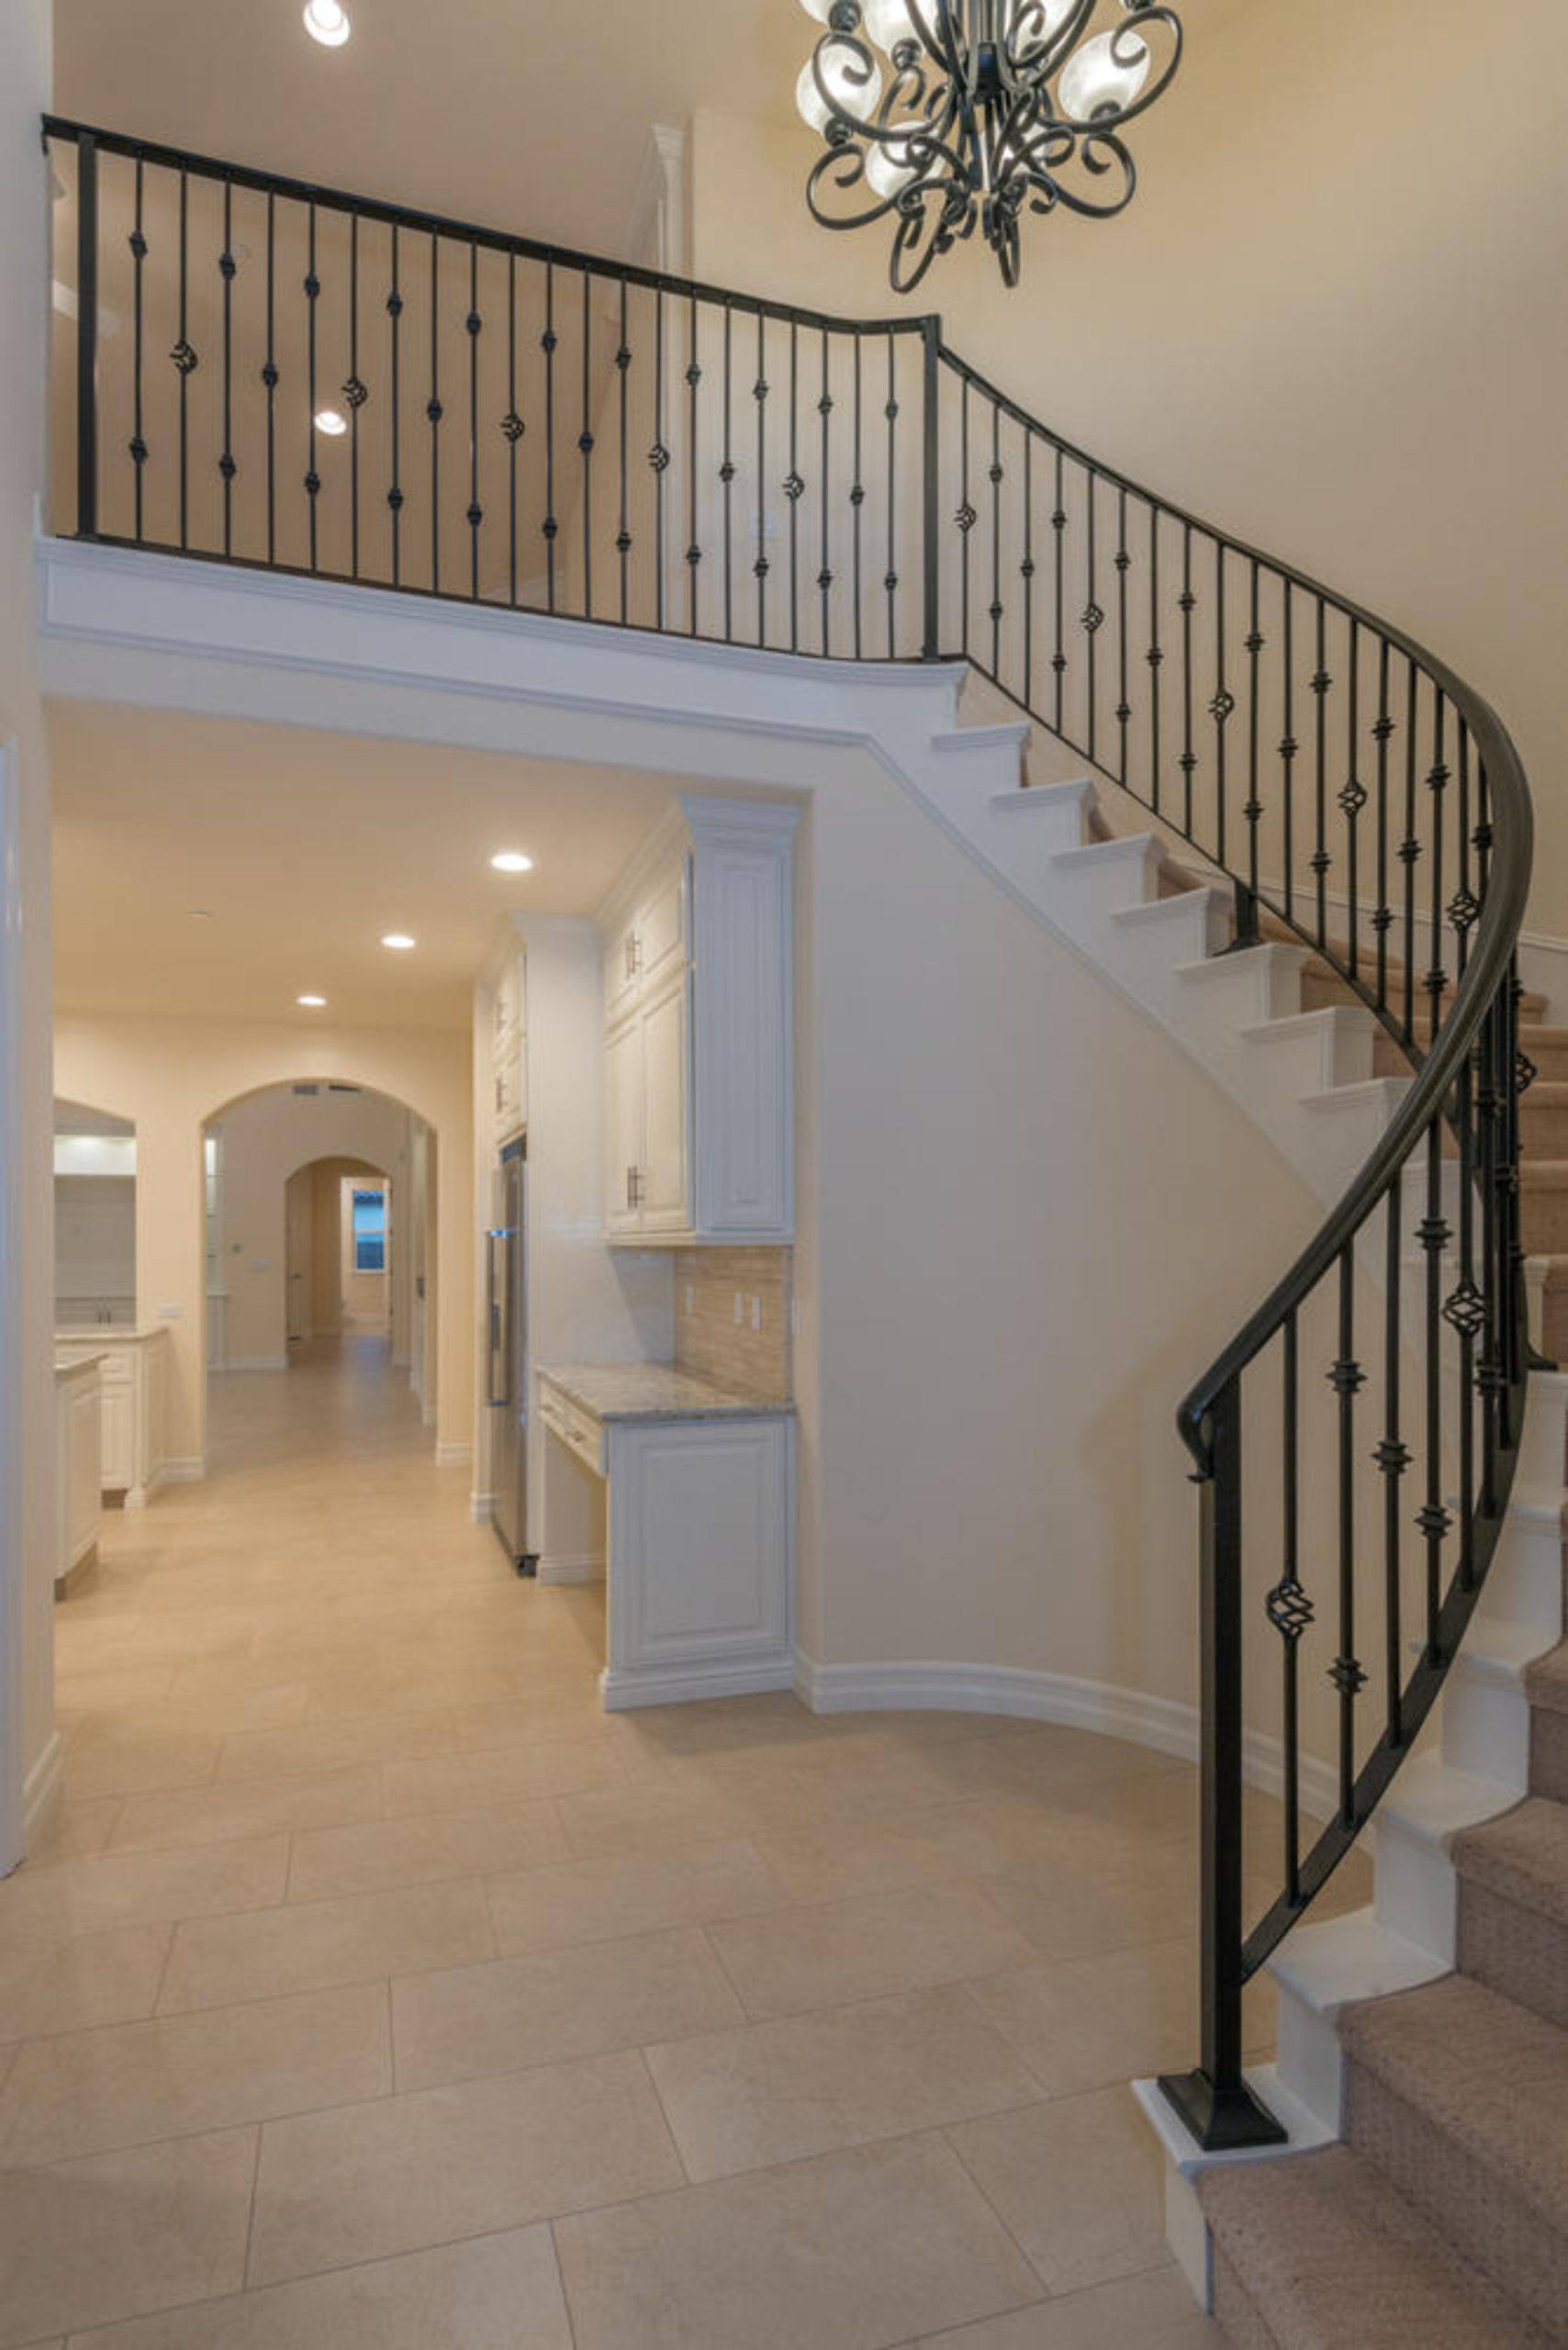 Curved staircase with iron banister with cream walls